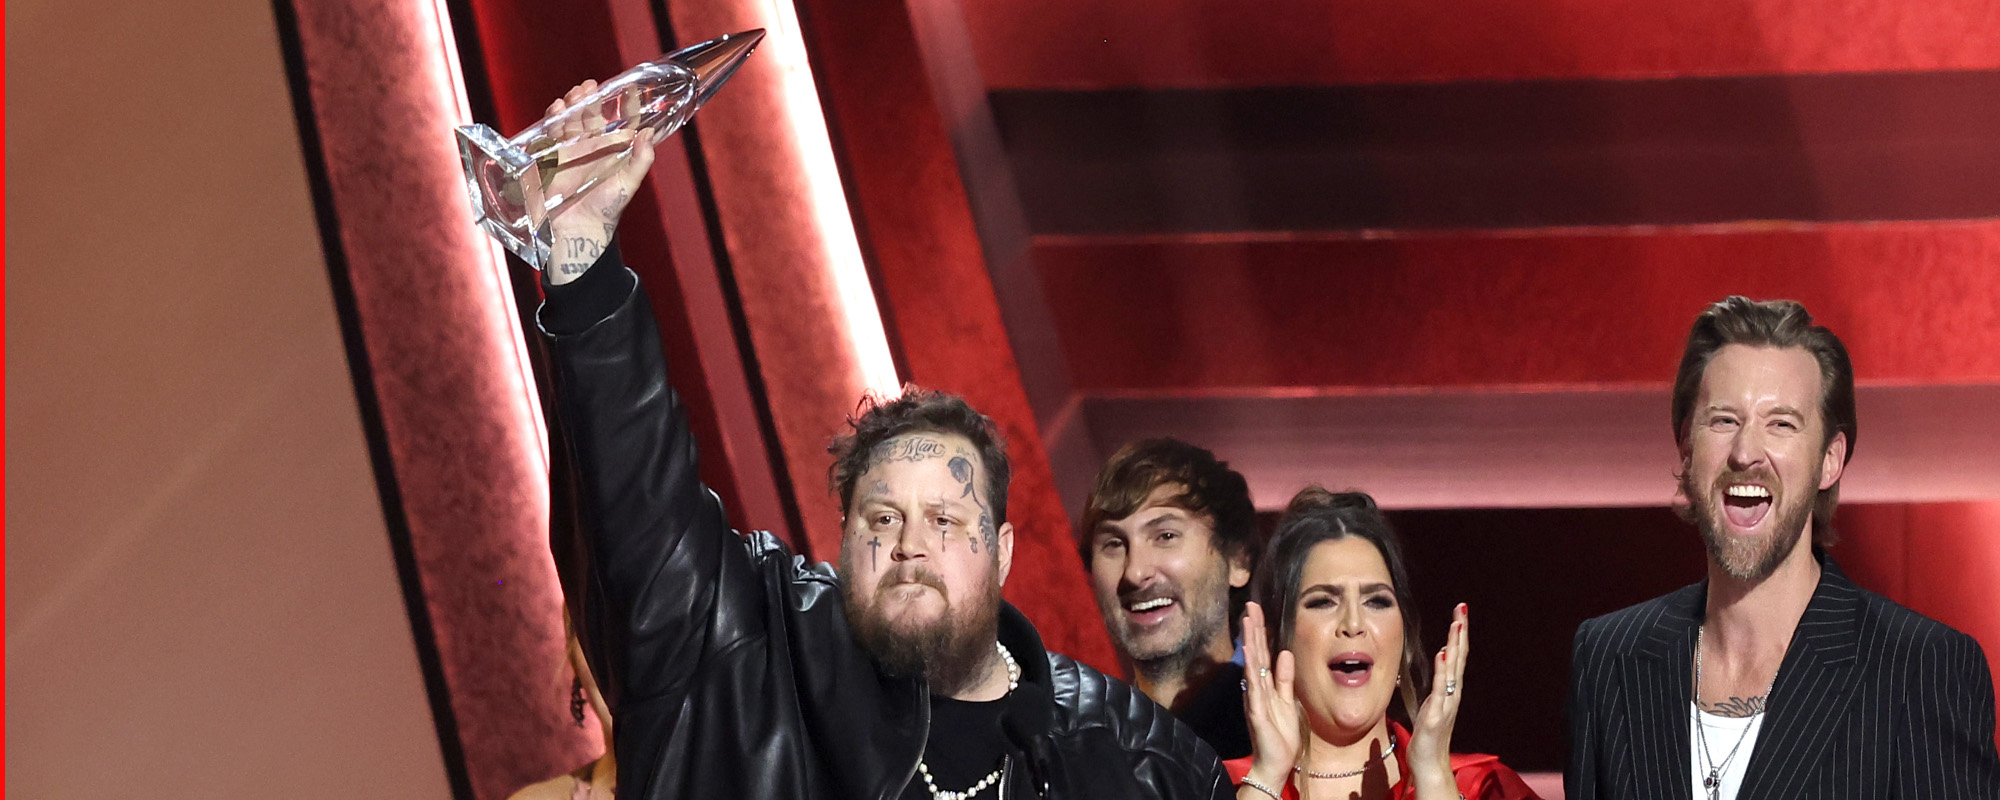 Jelly Roll Energizes CMA Awards with Passionate Acceptance Speech for New Artist of the Year—”Let’s Party Nashville!”